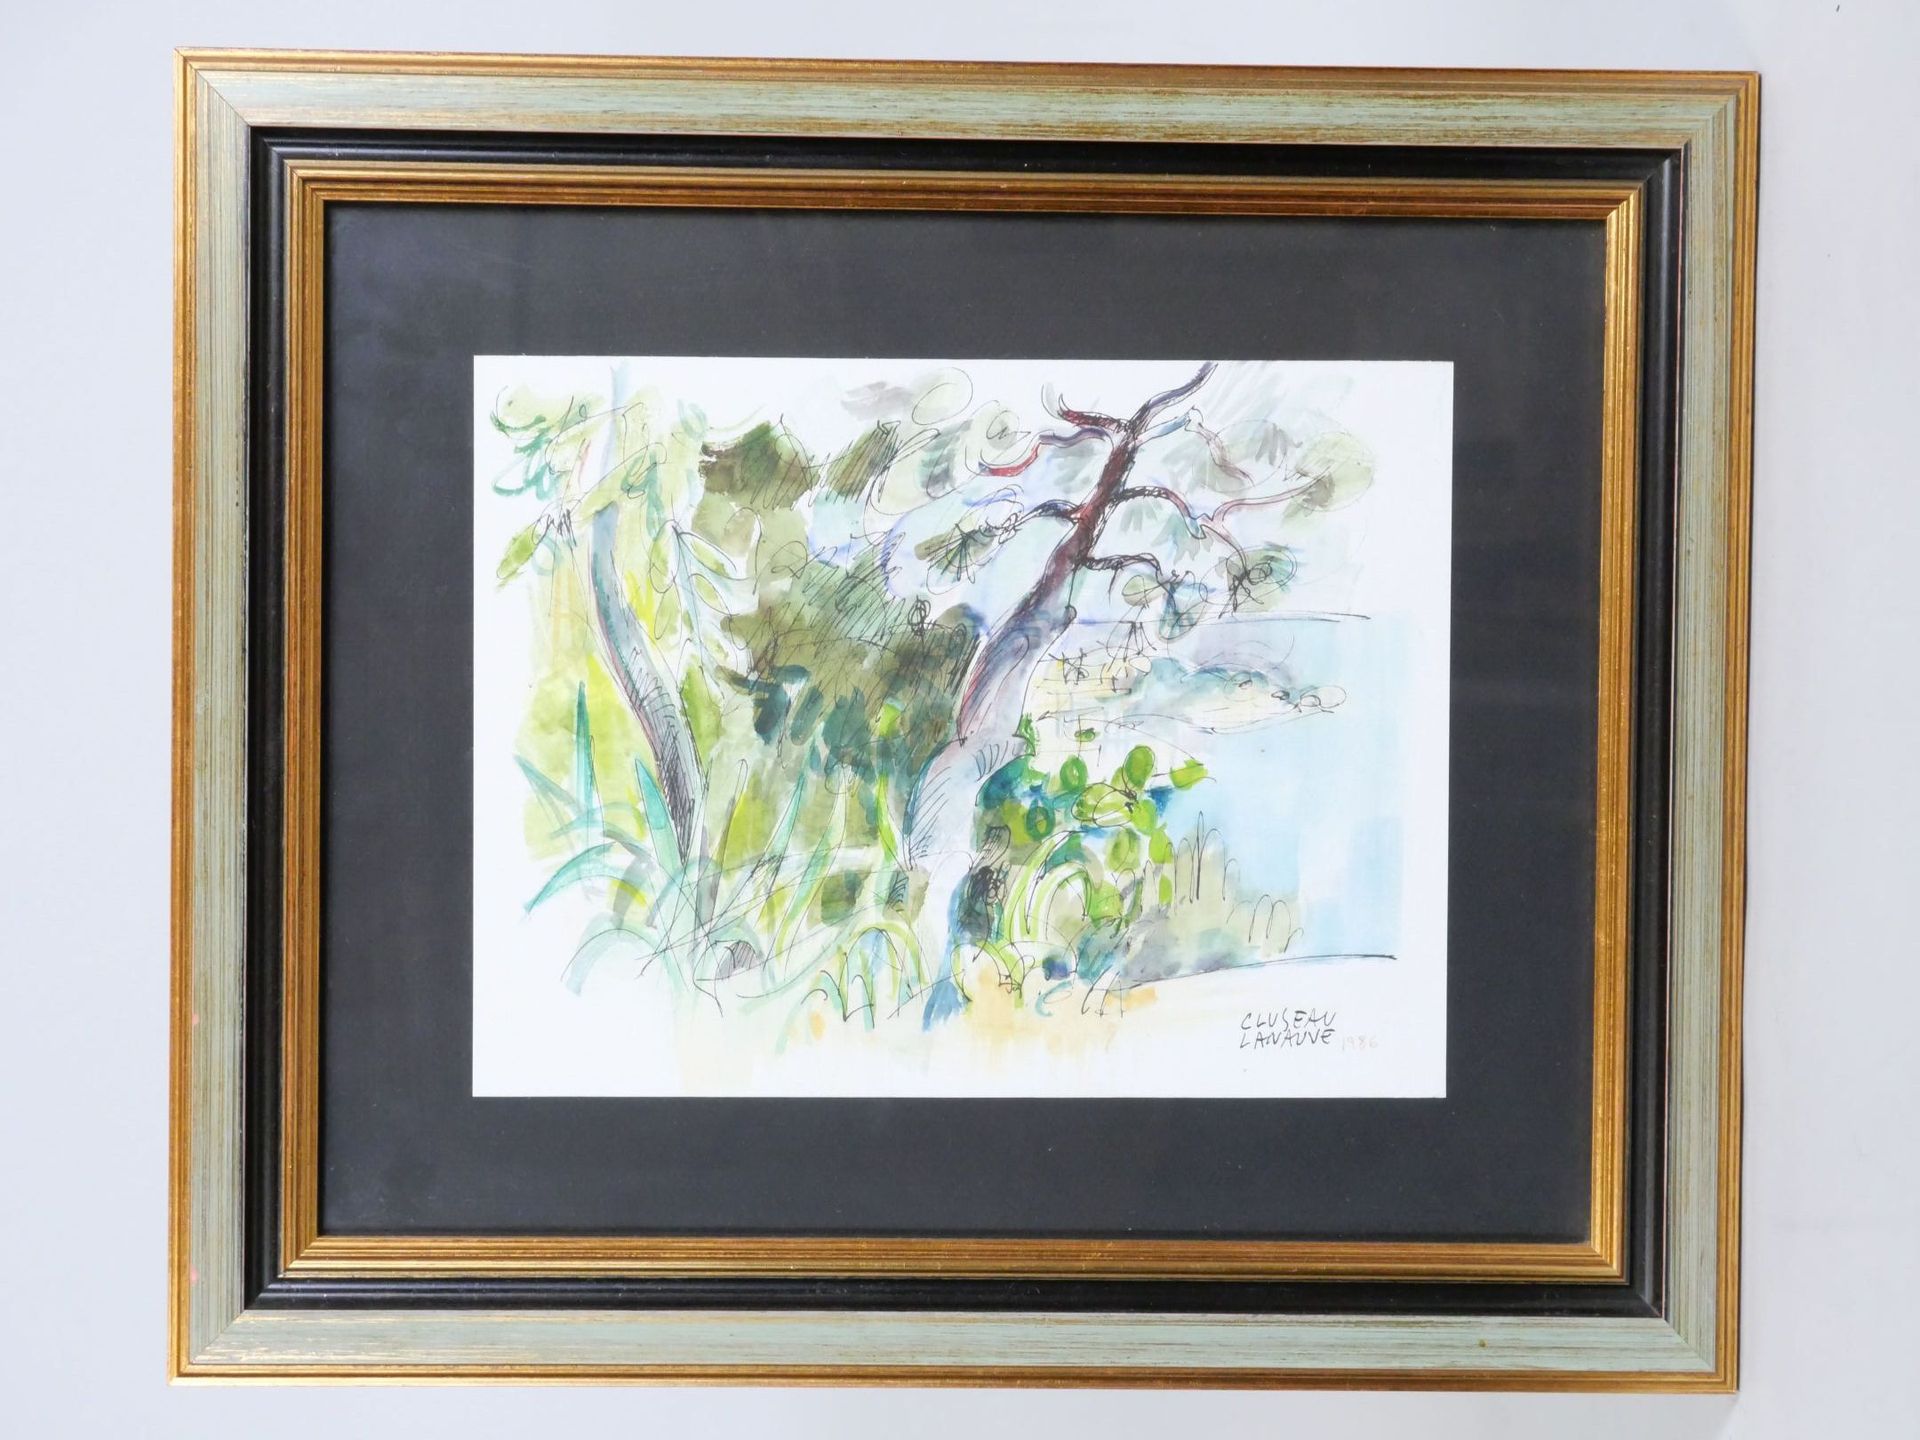 Null Jean CLUSEAU-LANAUVE (1914-1997)
Trees
Watercolor signed lower right and da&hellip;